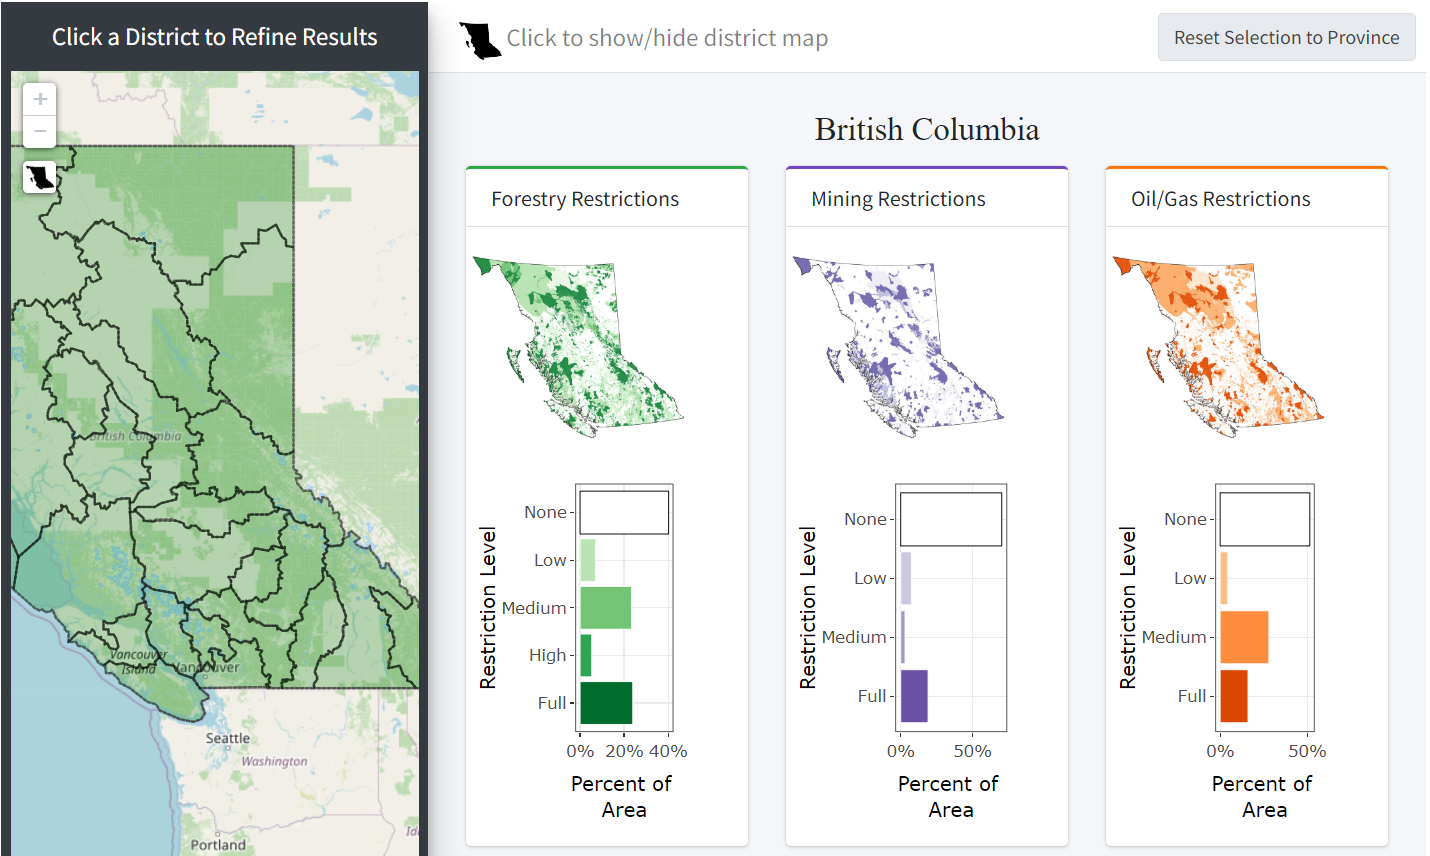 Image of interactive map of land designations that contribute to conservation by Ecoregions & Biogeoclimatic Zones Across B.C.